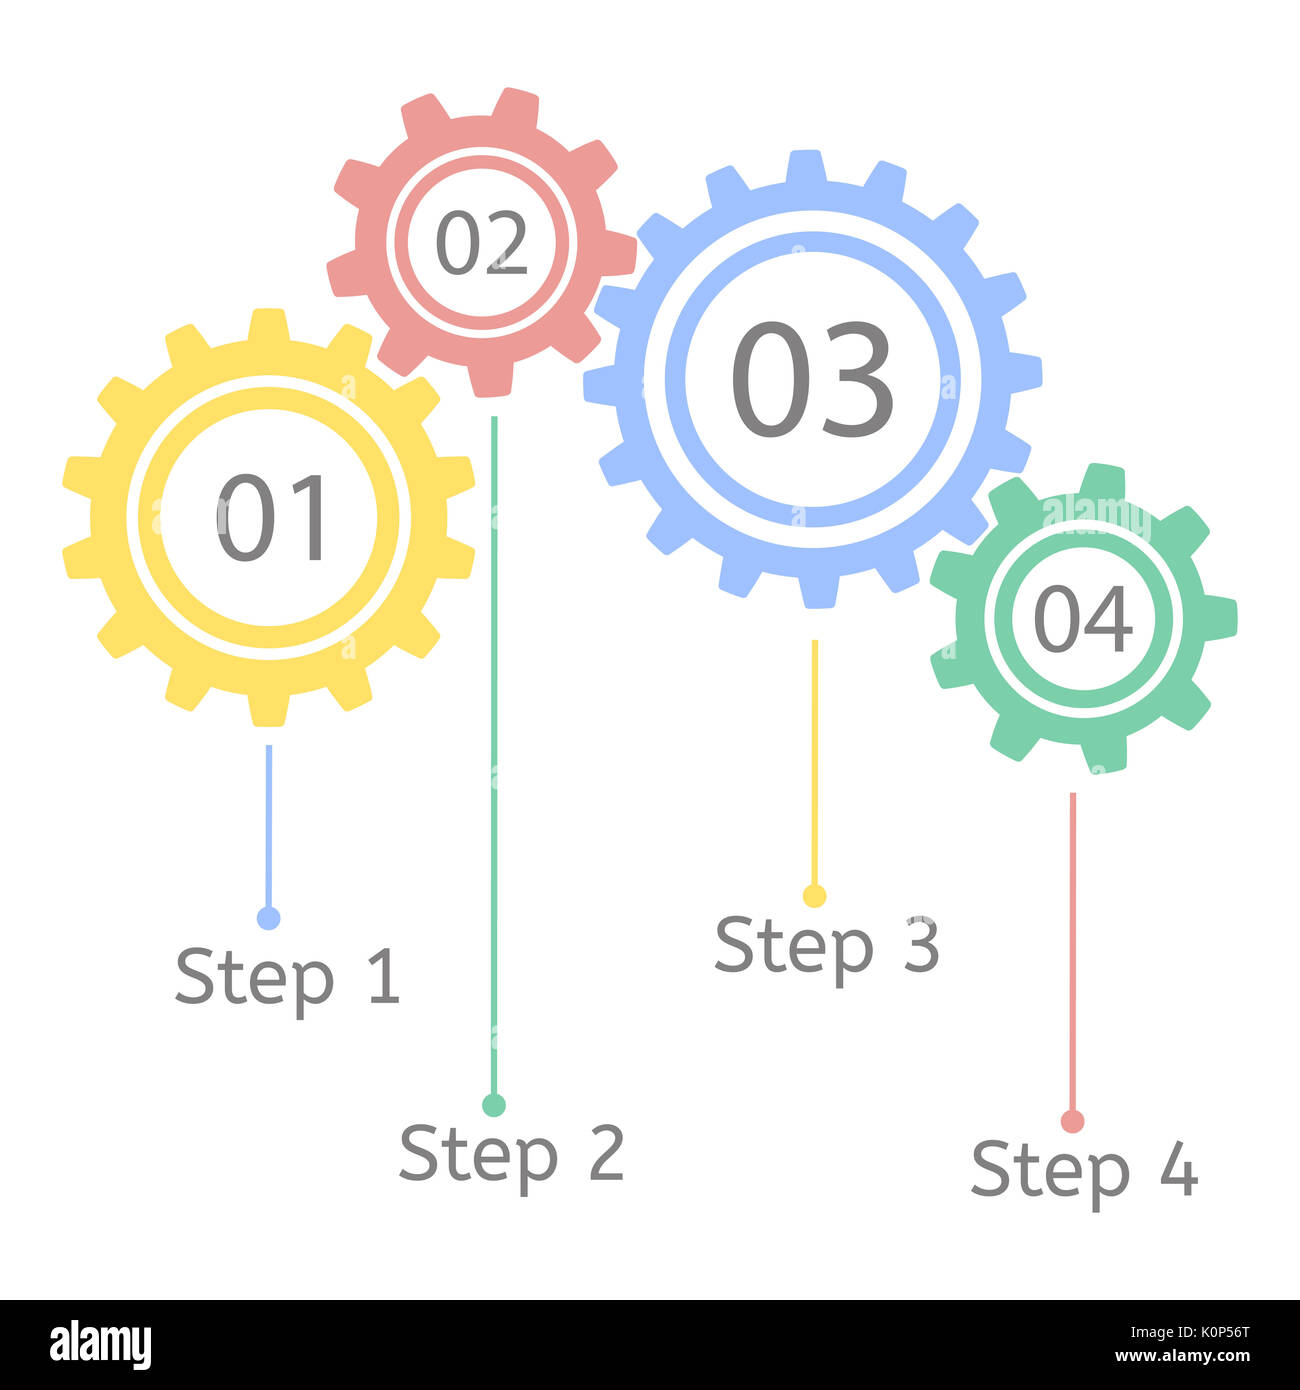 Gear statistic concept. Infographic business template. Cogwheel connection, teamwork. Steps by step. Stock Photo